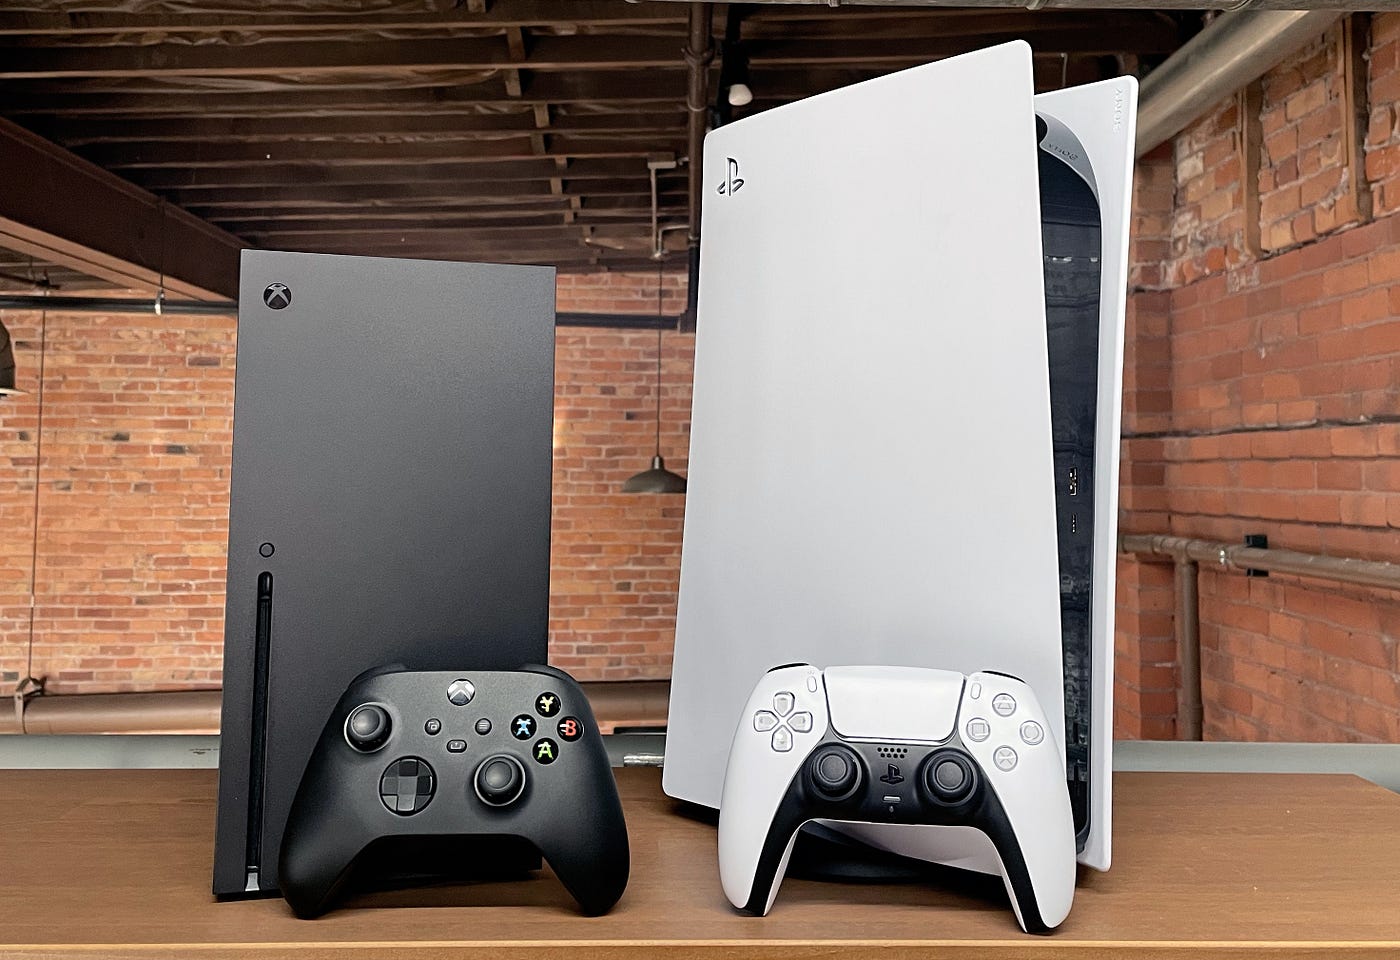 Xbox One Is the New Standard That Future Consoles Should Imitate